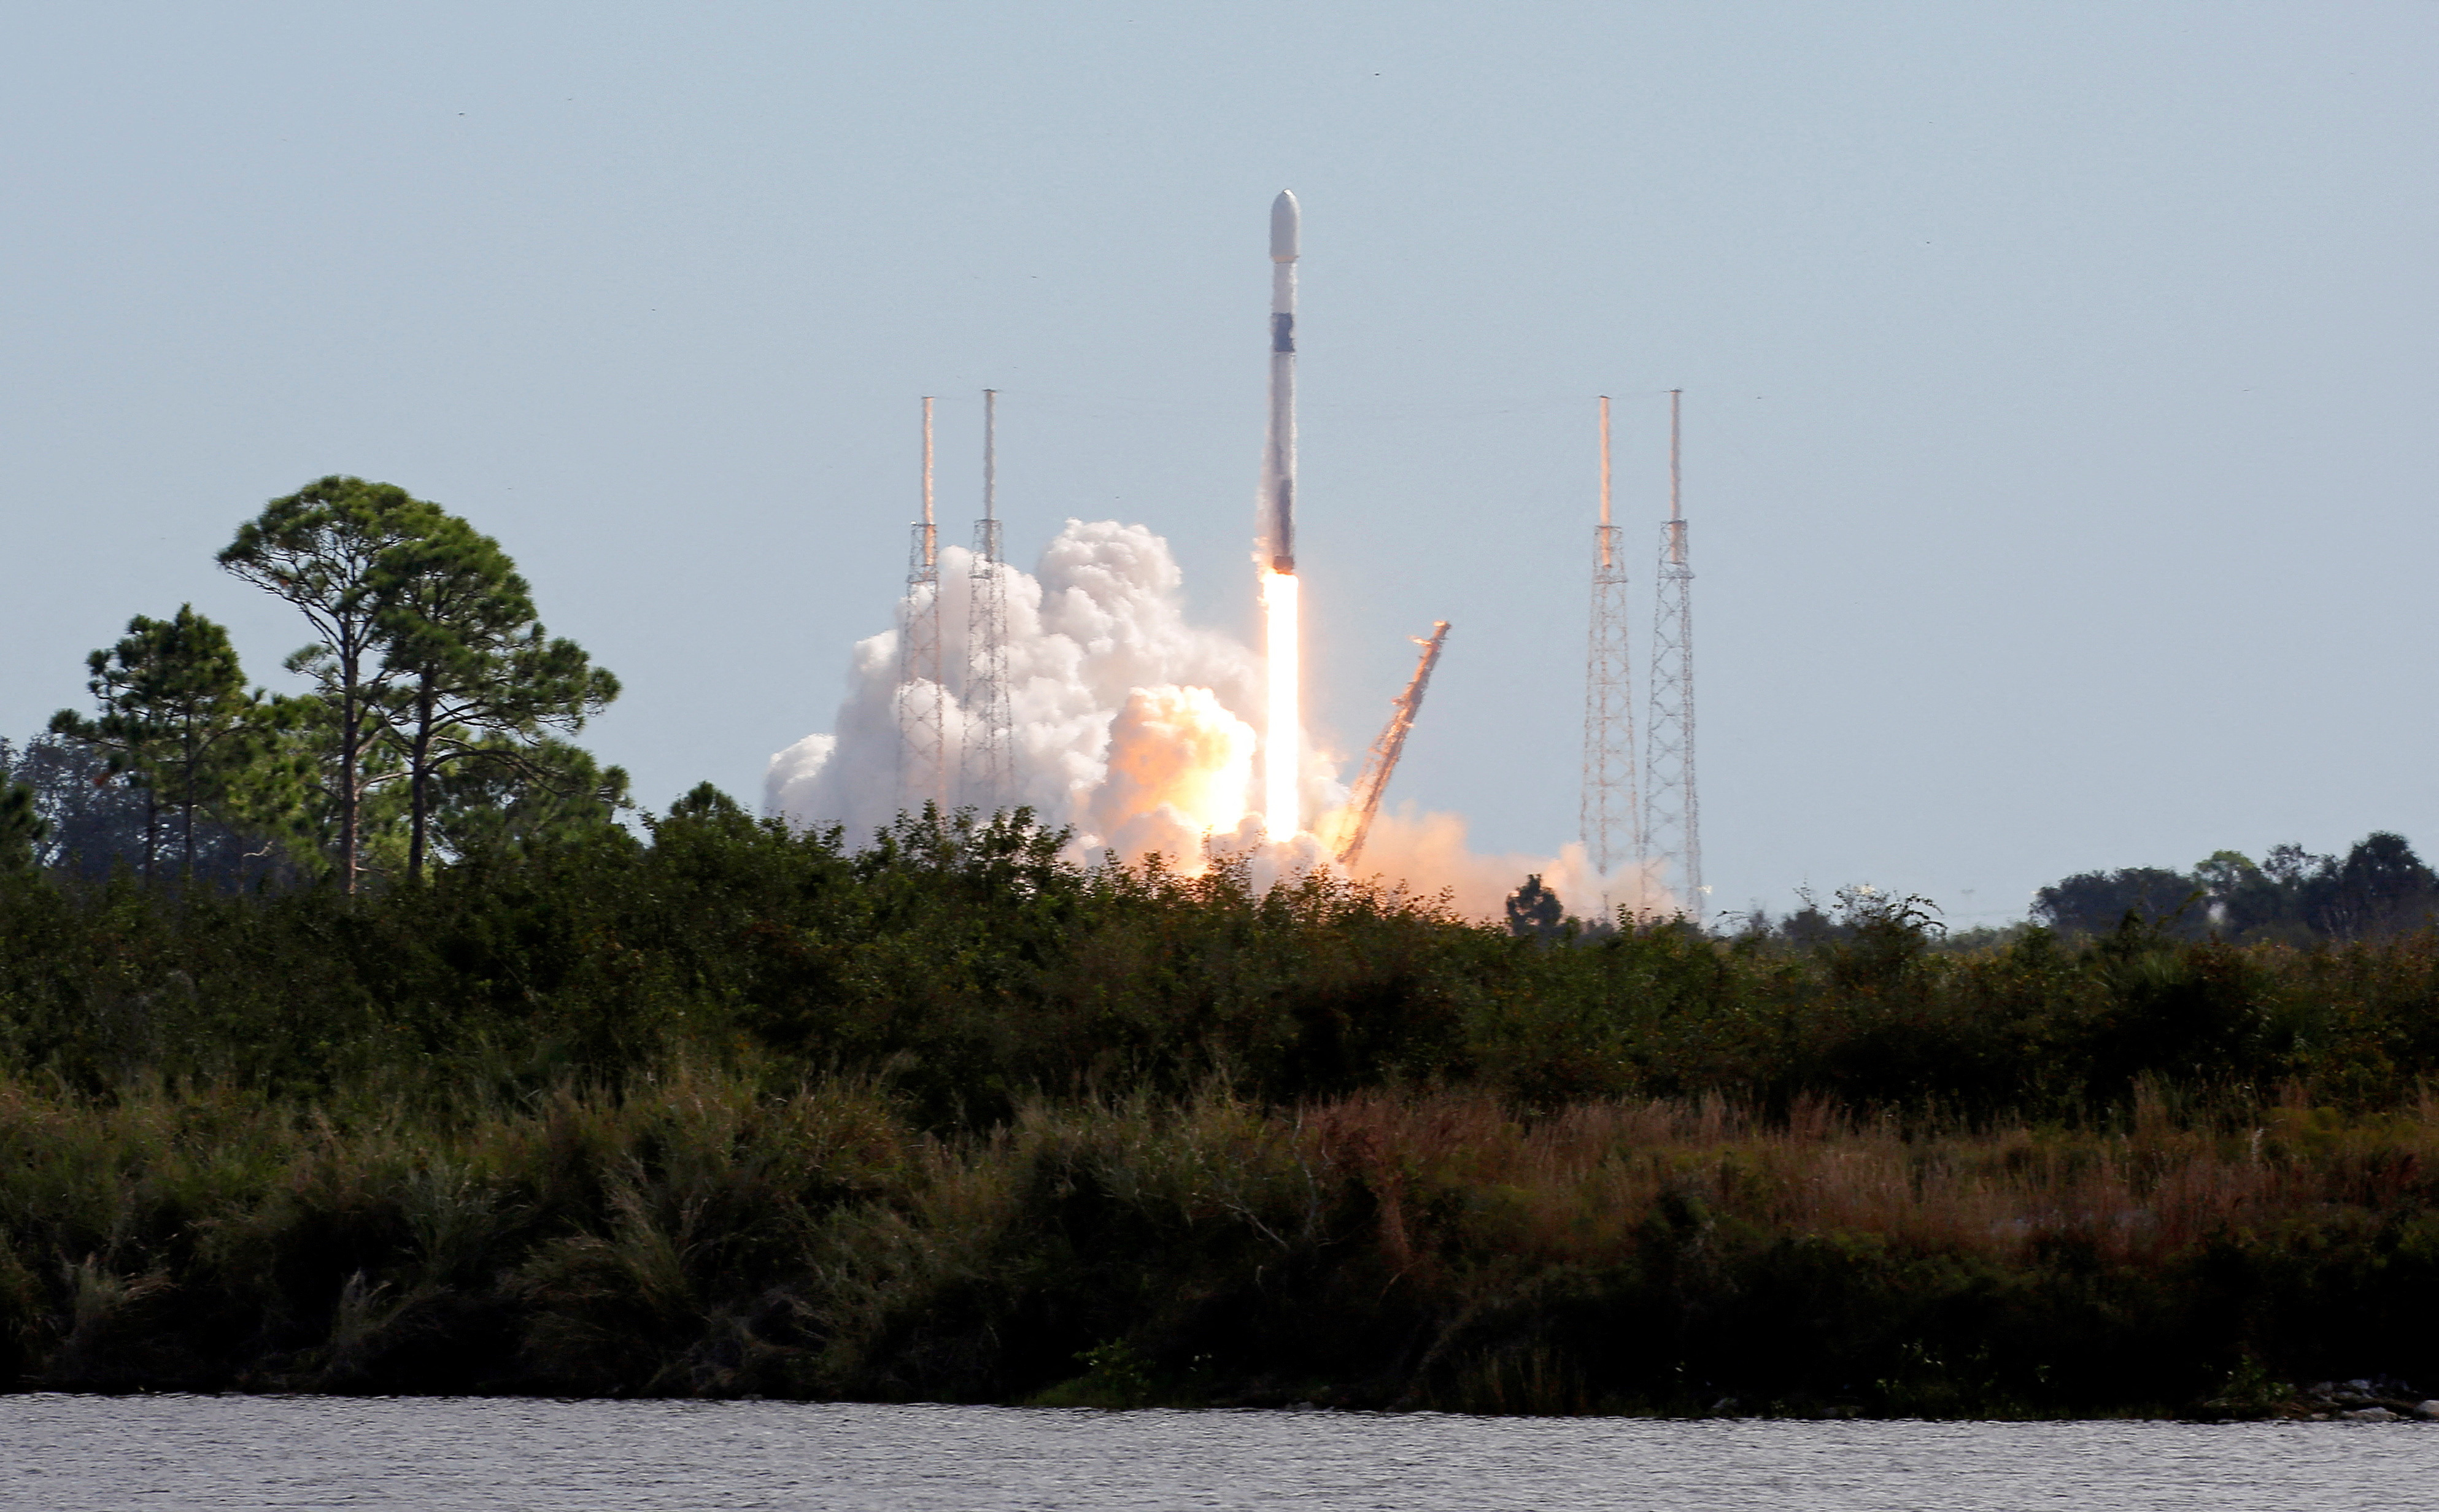 SpaceX launches a Falcon 9 rocket carrying a pair of television broadcasting satellites for Intelsat from launch pad 40